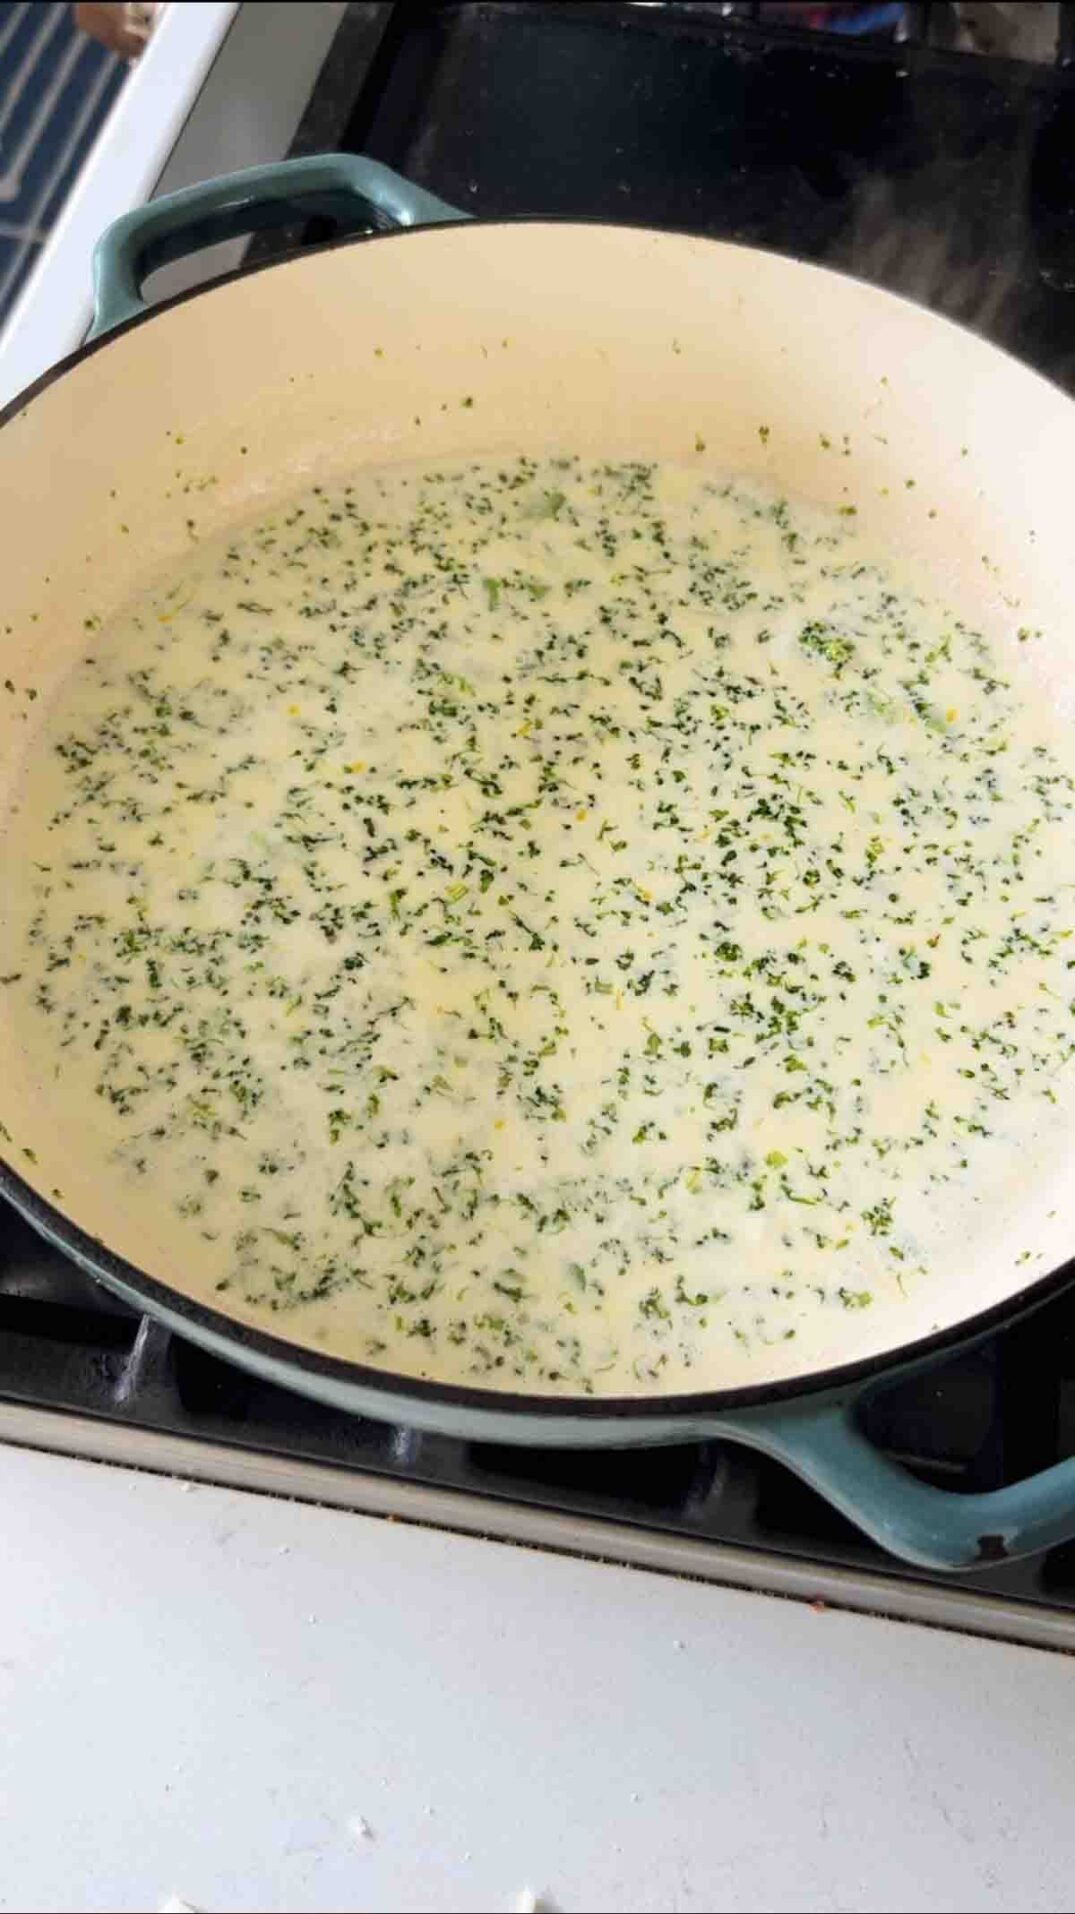 lemon cream sauce with broccoli in a blue braising dish on a stovetop.